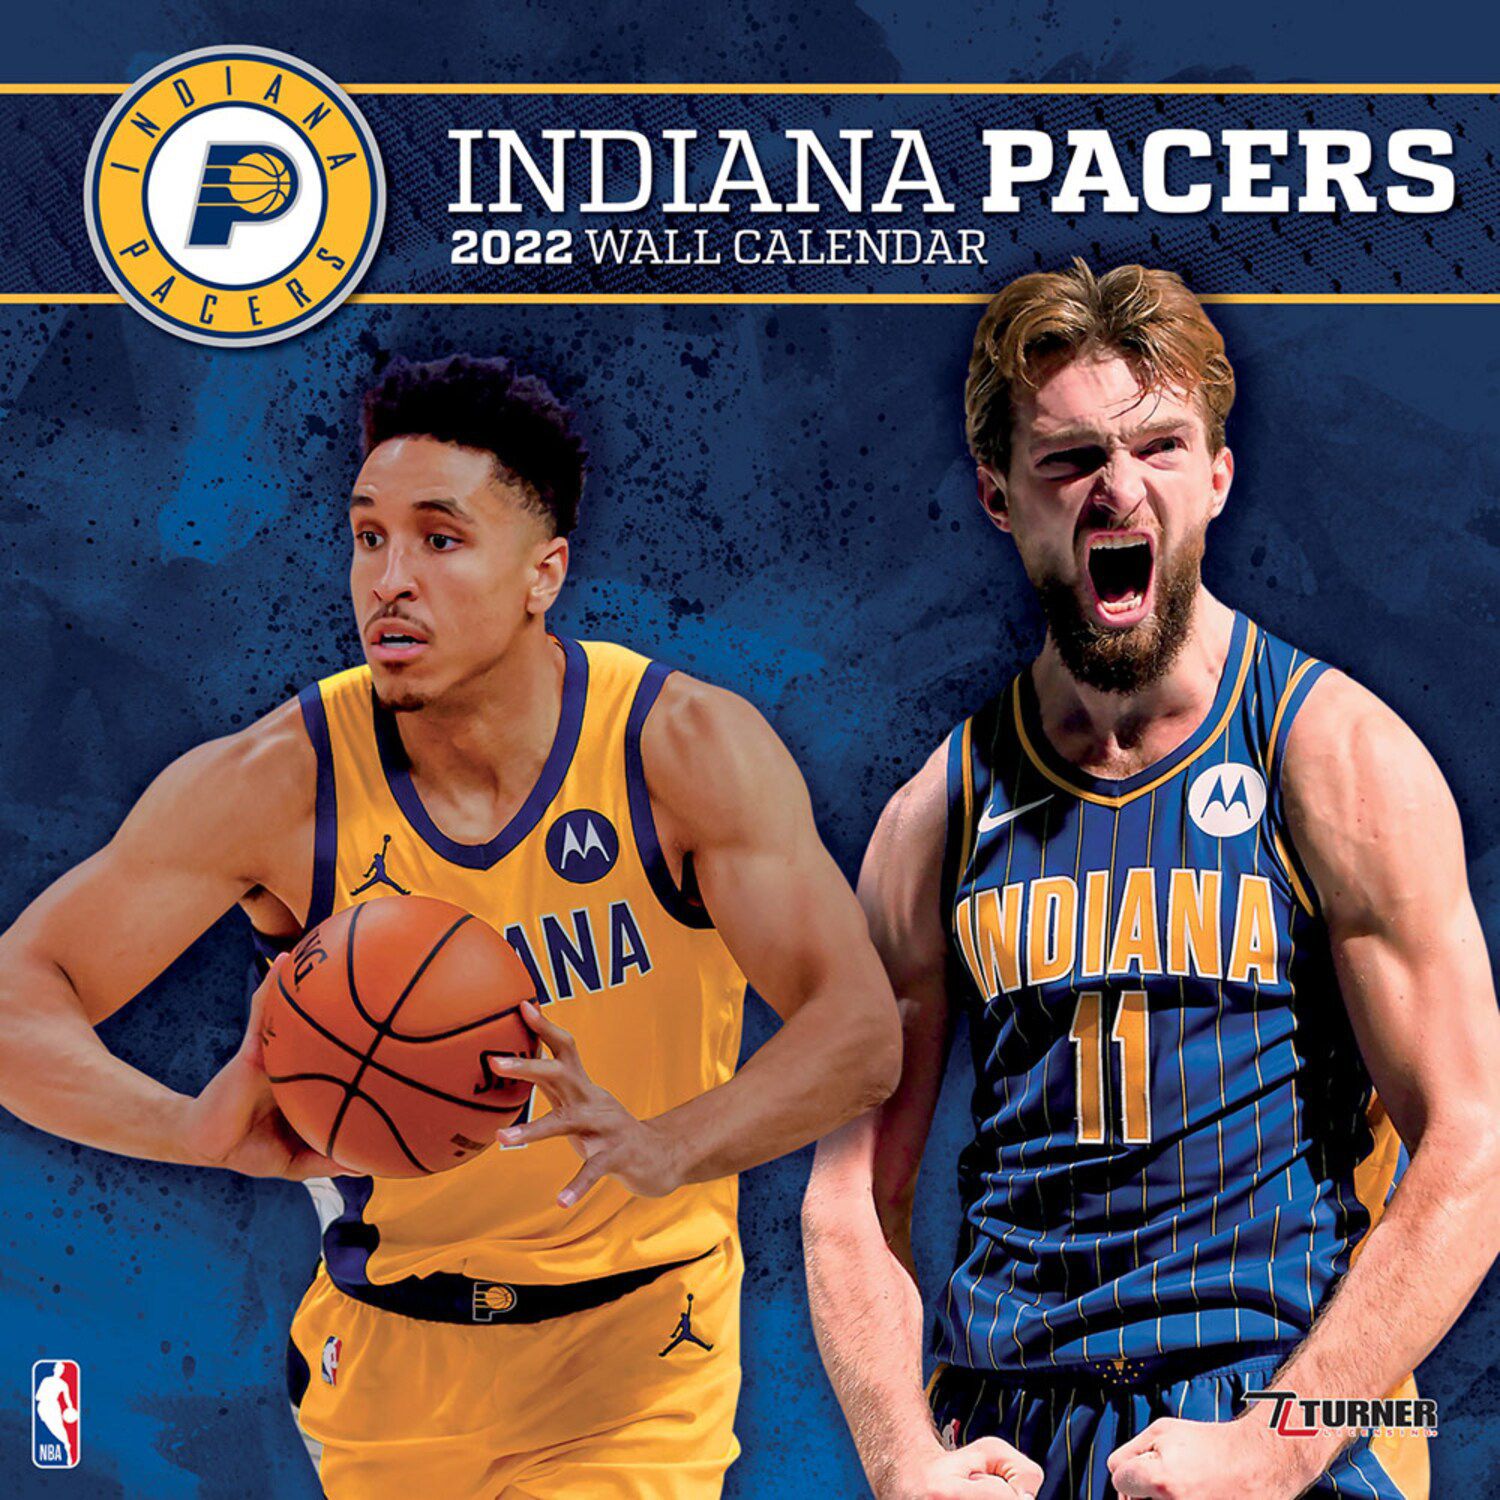 Image for Unbranded Indiana Pacers 2022 Wall Calendar at Kohl's.